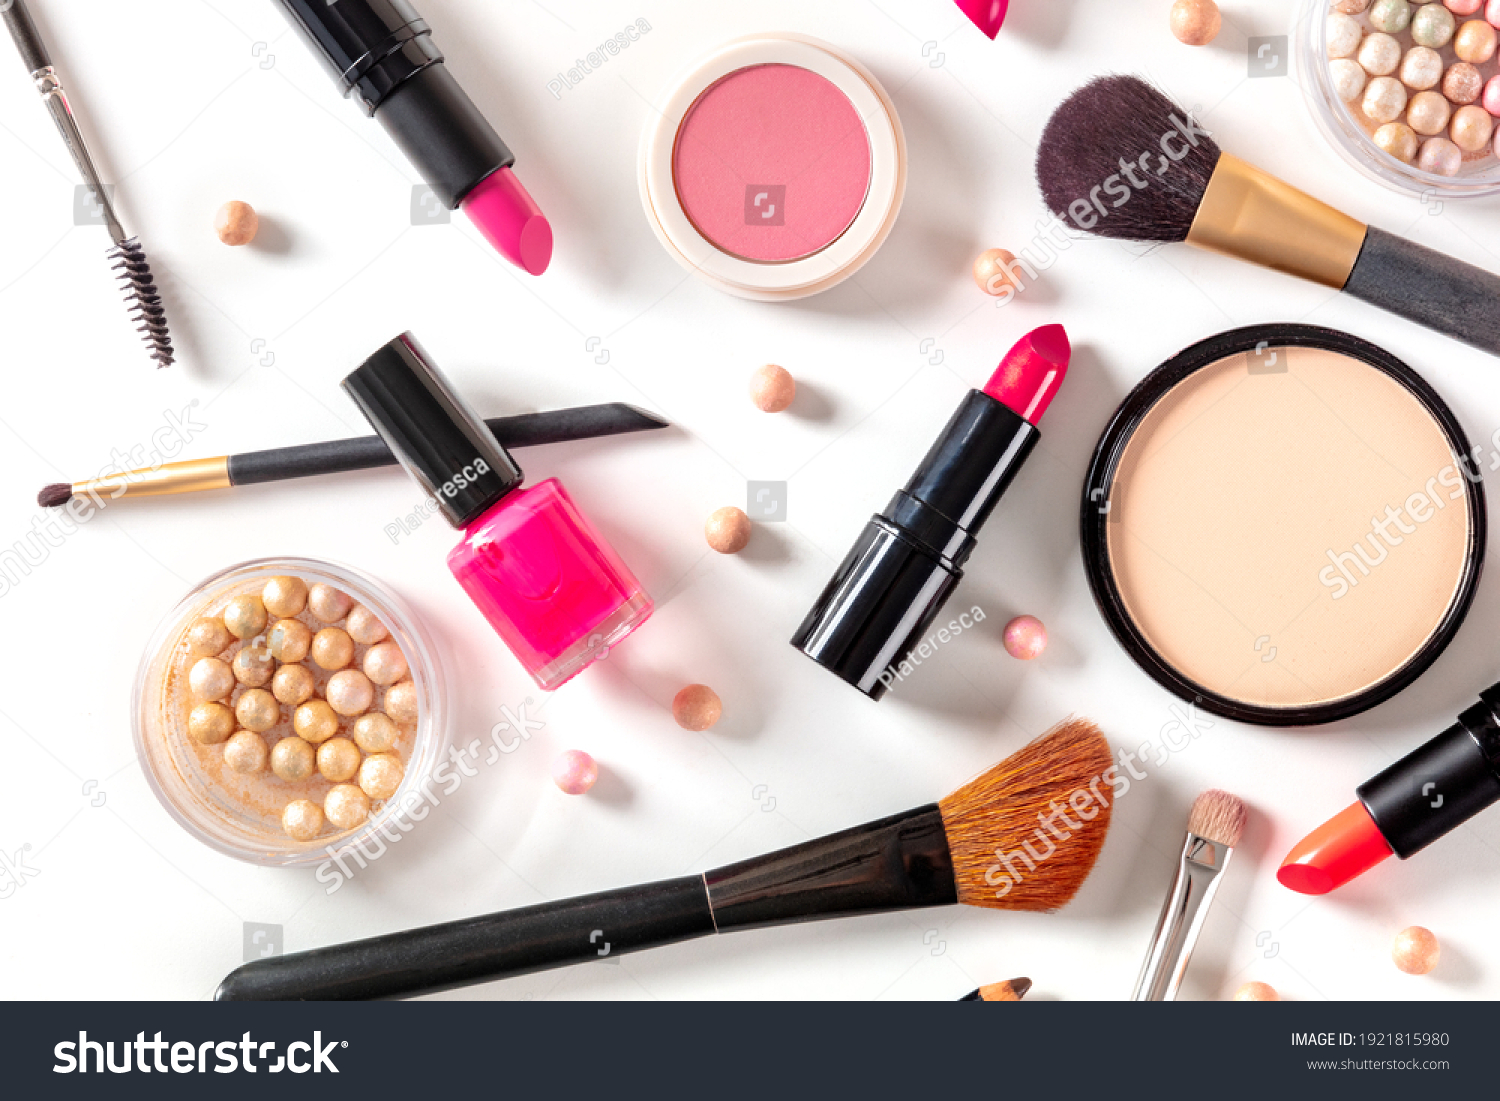 Make-up products, shot from the top on a white background. Various cosmetics #1921815980